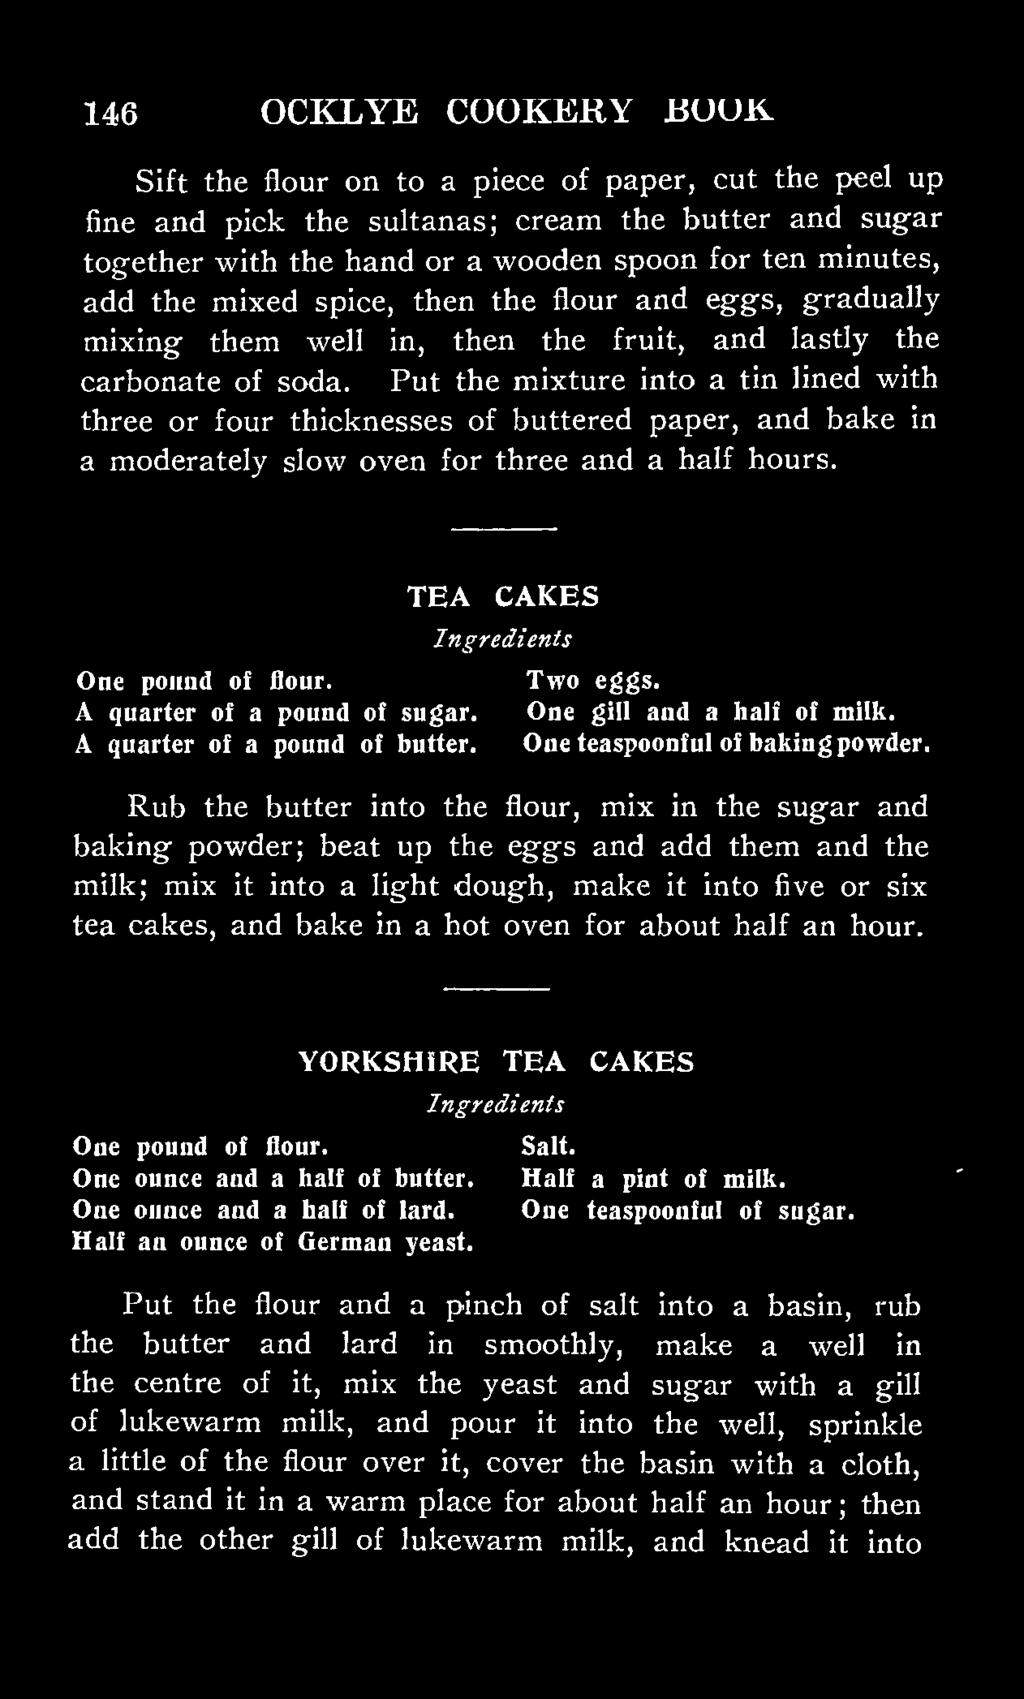 Put the mixture into a tin lined with three or four thicknesses of buttered paper, and bake in a moderately slow oven for three and a half hours. TEA CAKES One pound of flour. Two eggs.